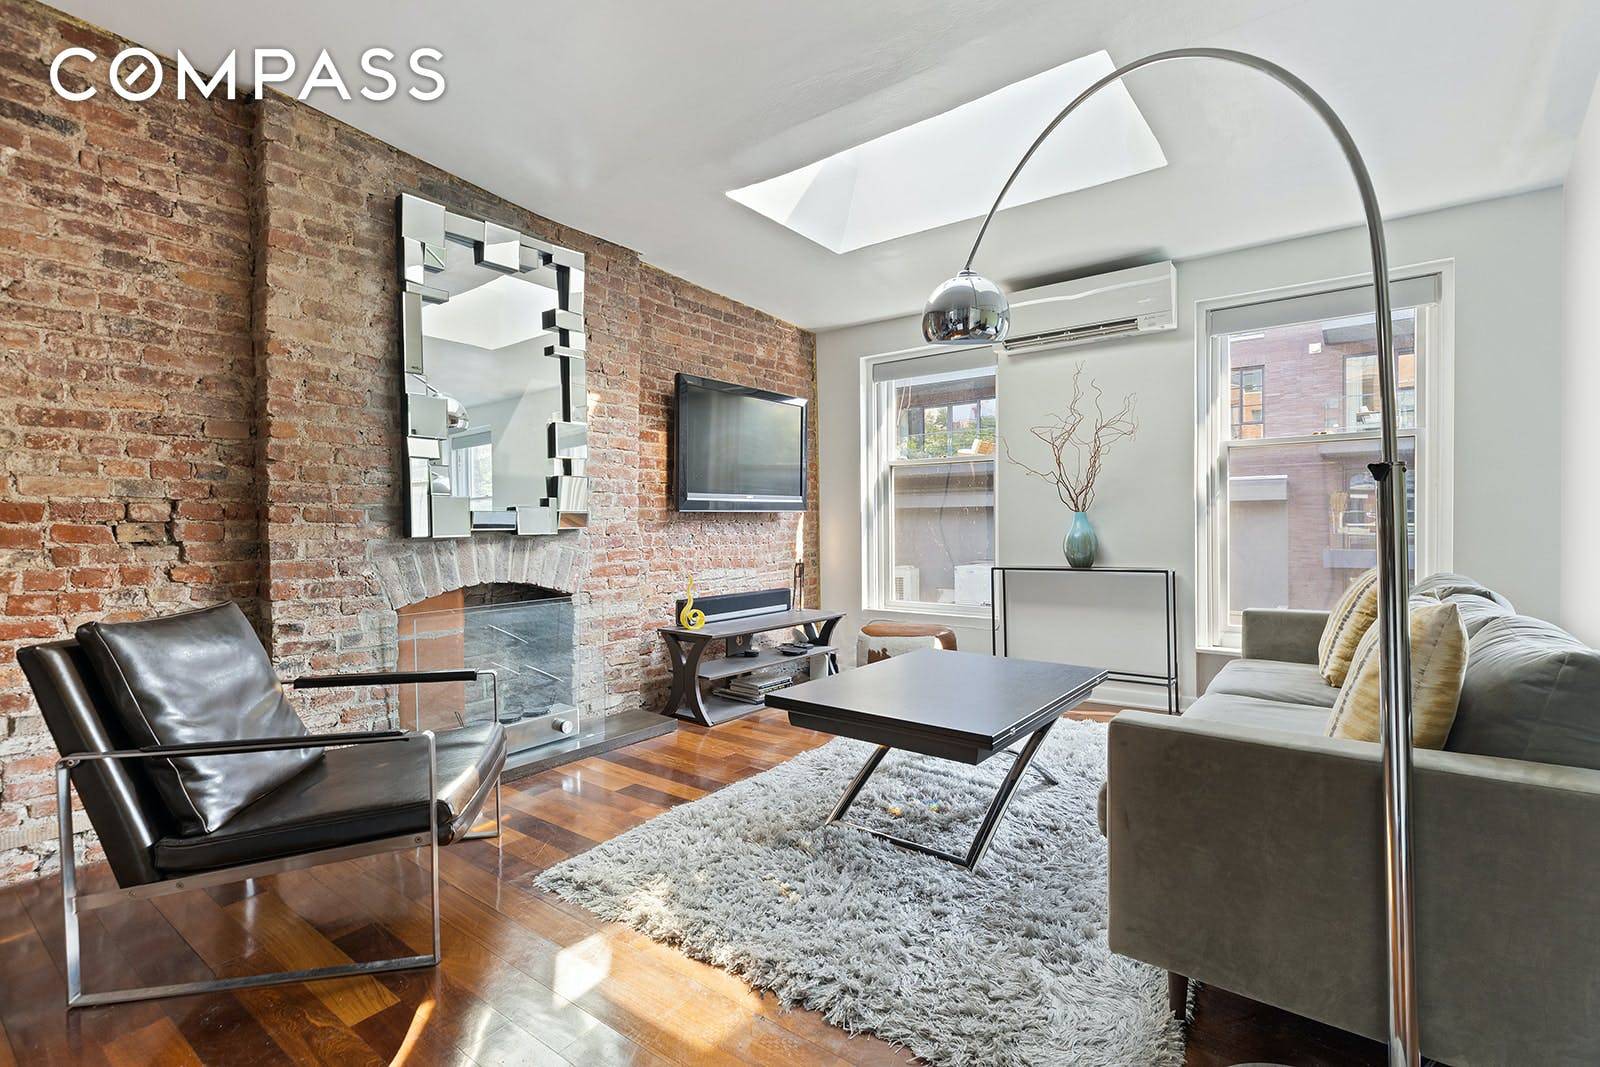 Located on a beautiful quiet block at the crossroads of Chelsea and the West Village.